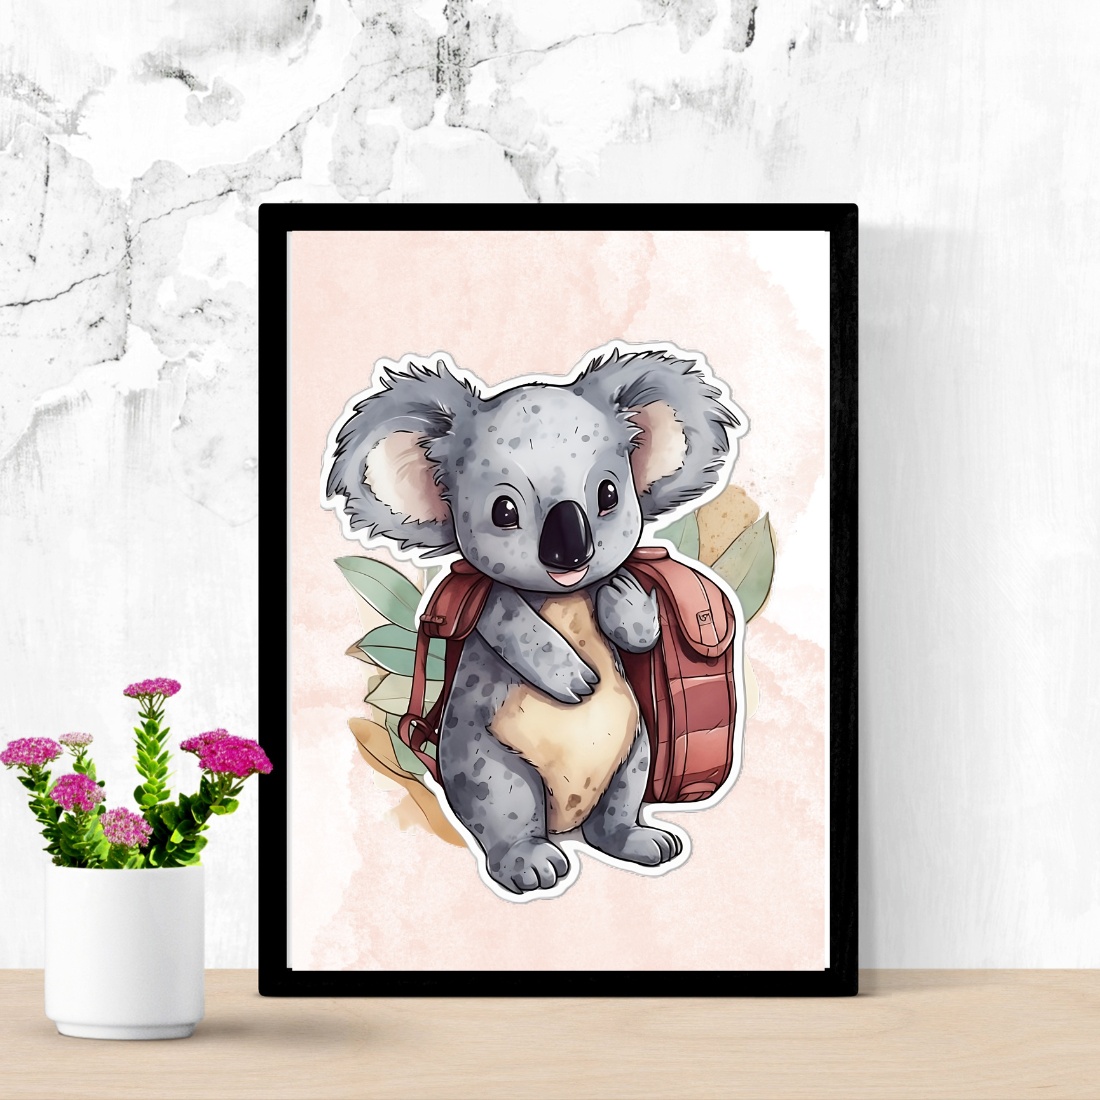 Picture of a koala bear with a backpack.